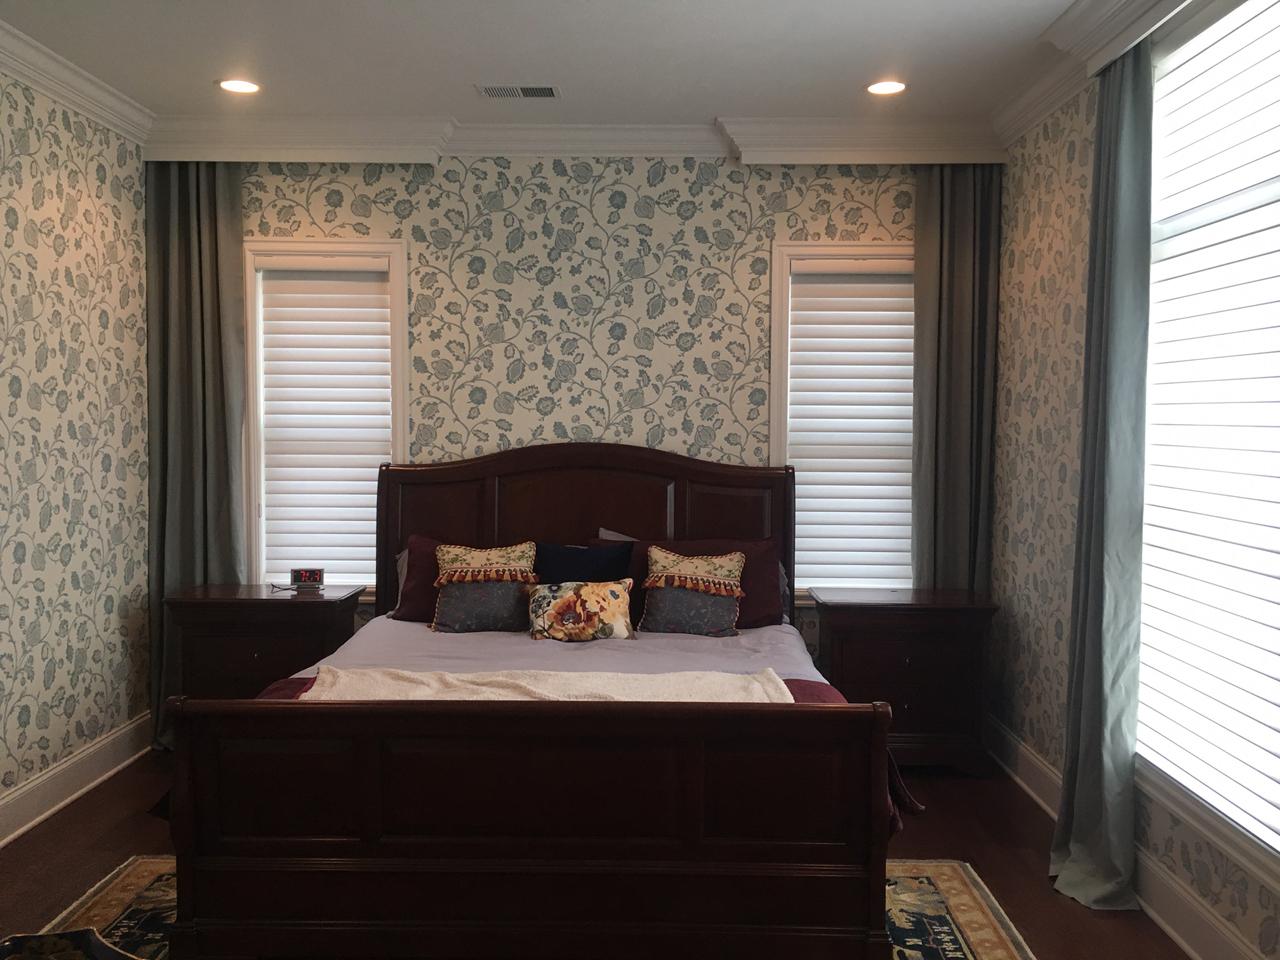 Cellular shades in a bedroom